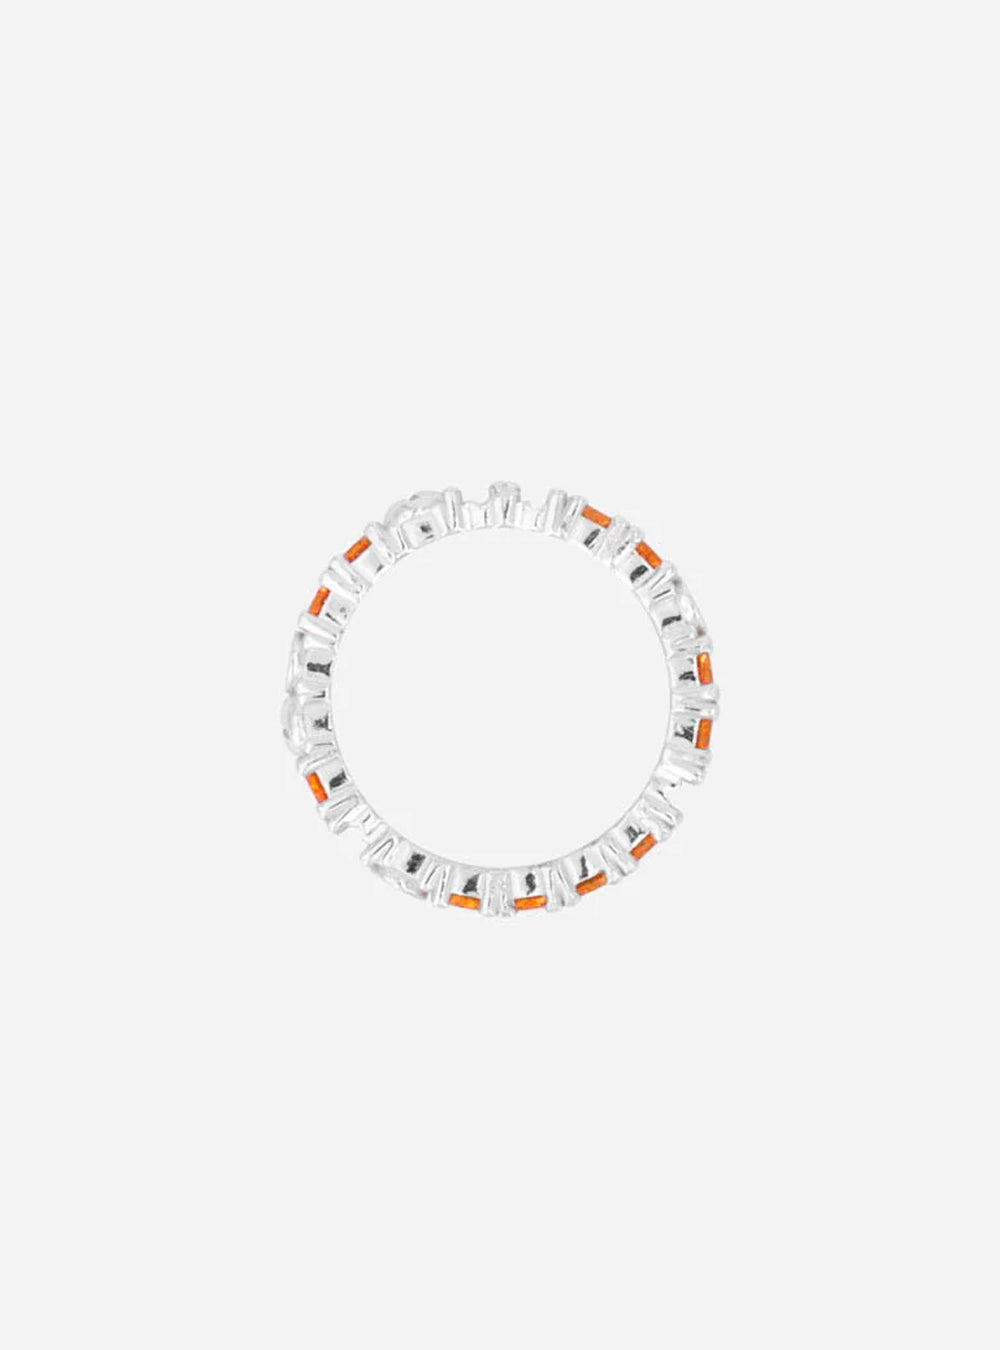 A MIDNIGHTFACTORY Broken eternity ring with sapphire on a white background.